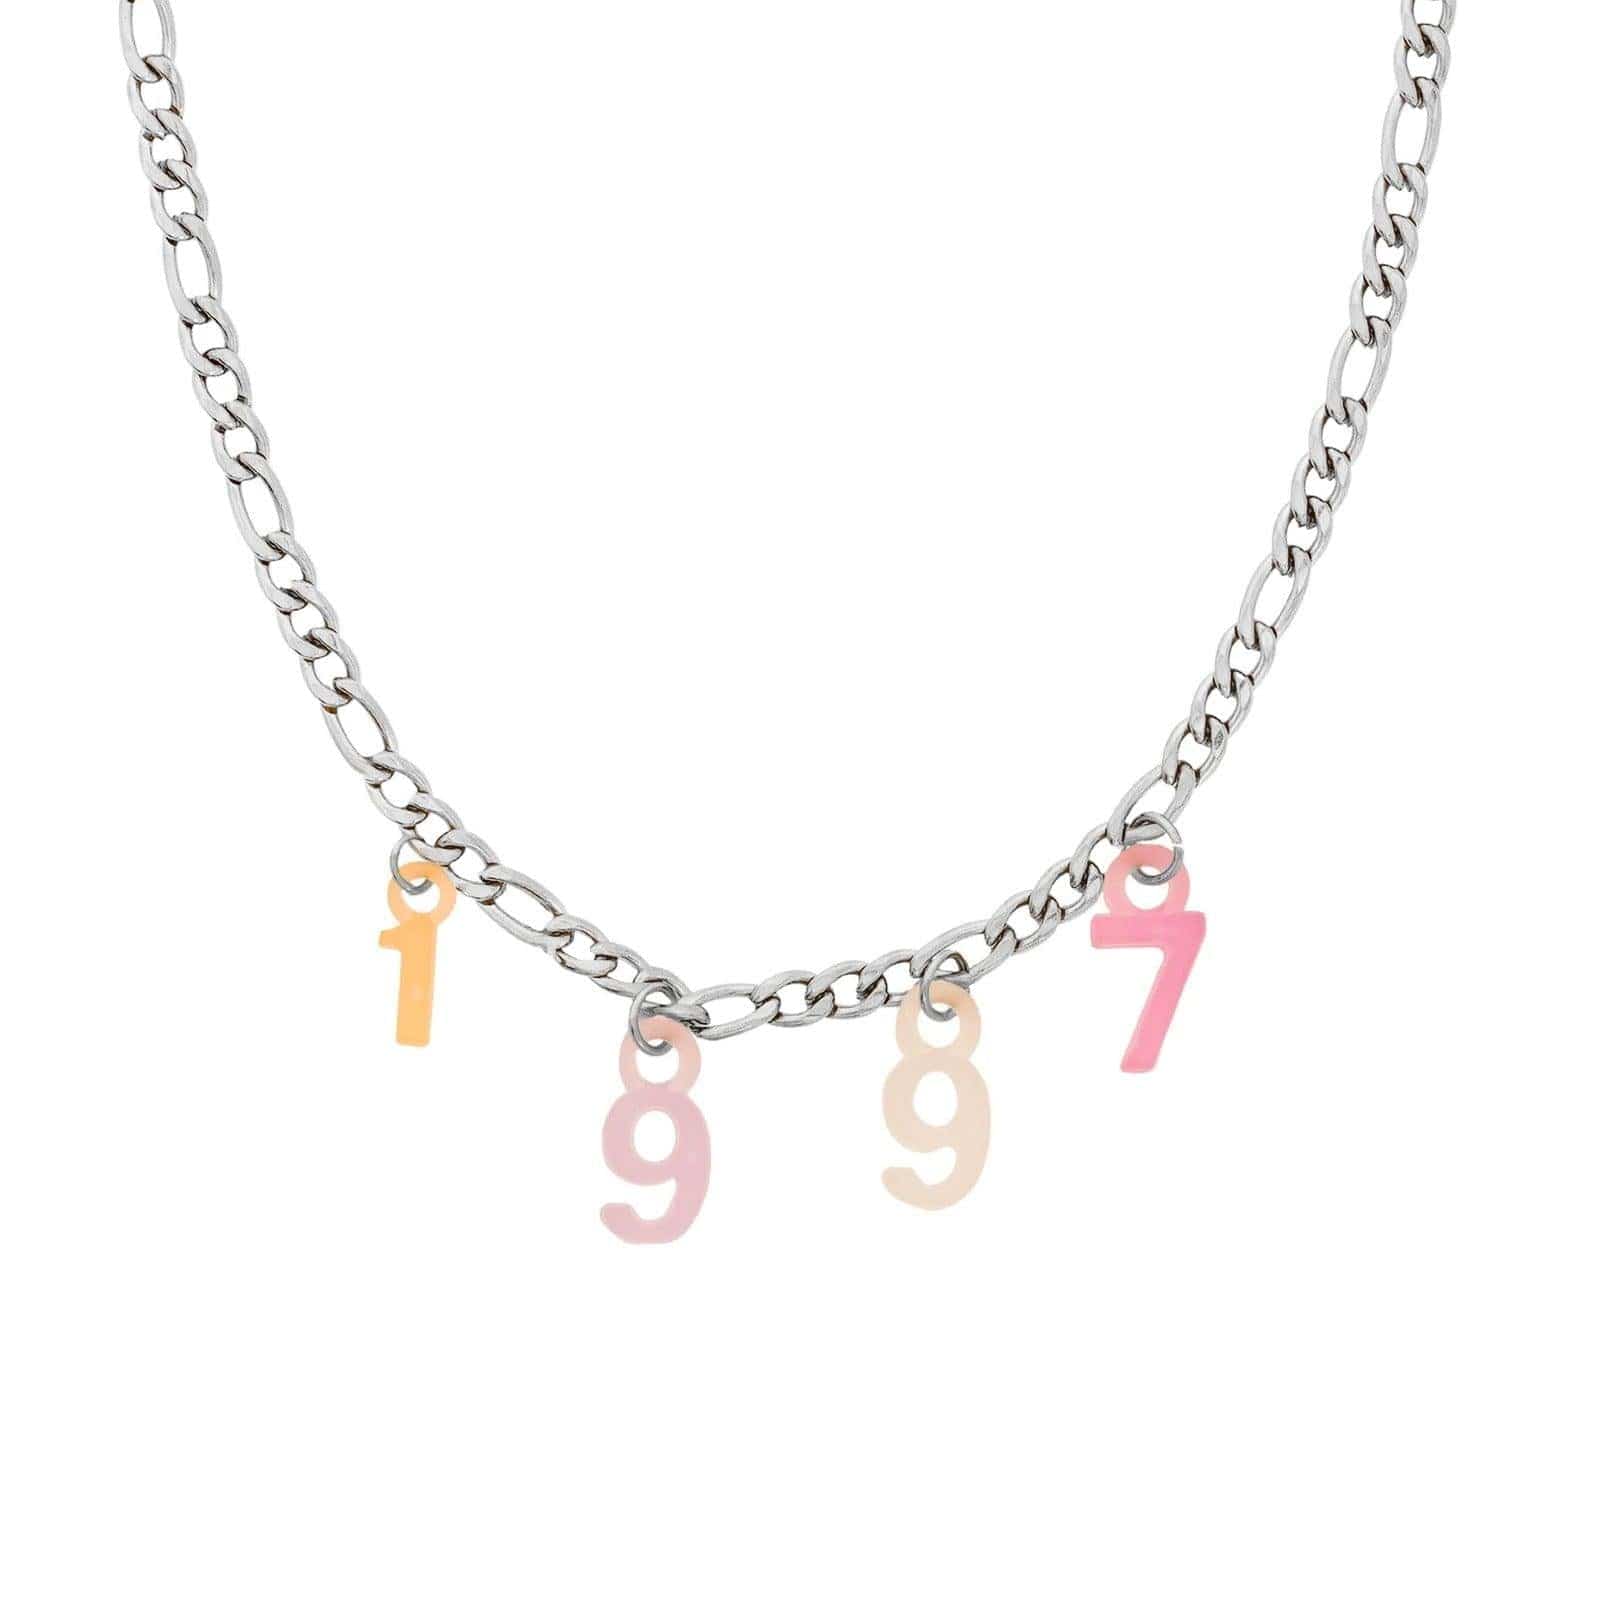 BohoMoon Stainless Steel Frosted Custom Year Choker Silver